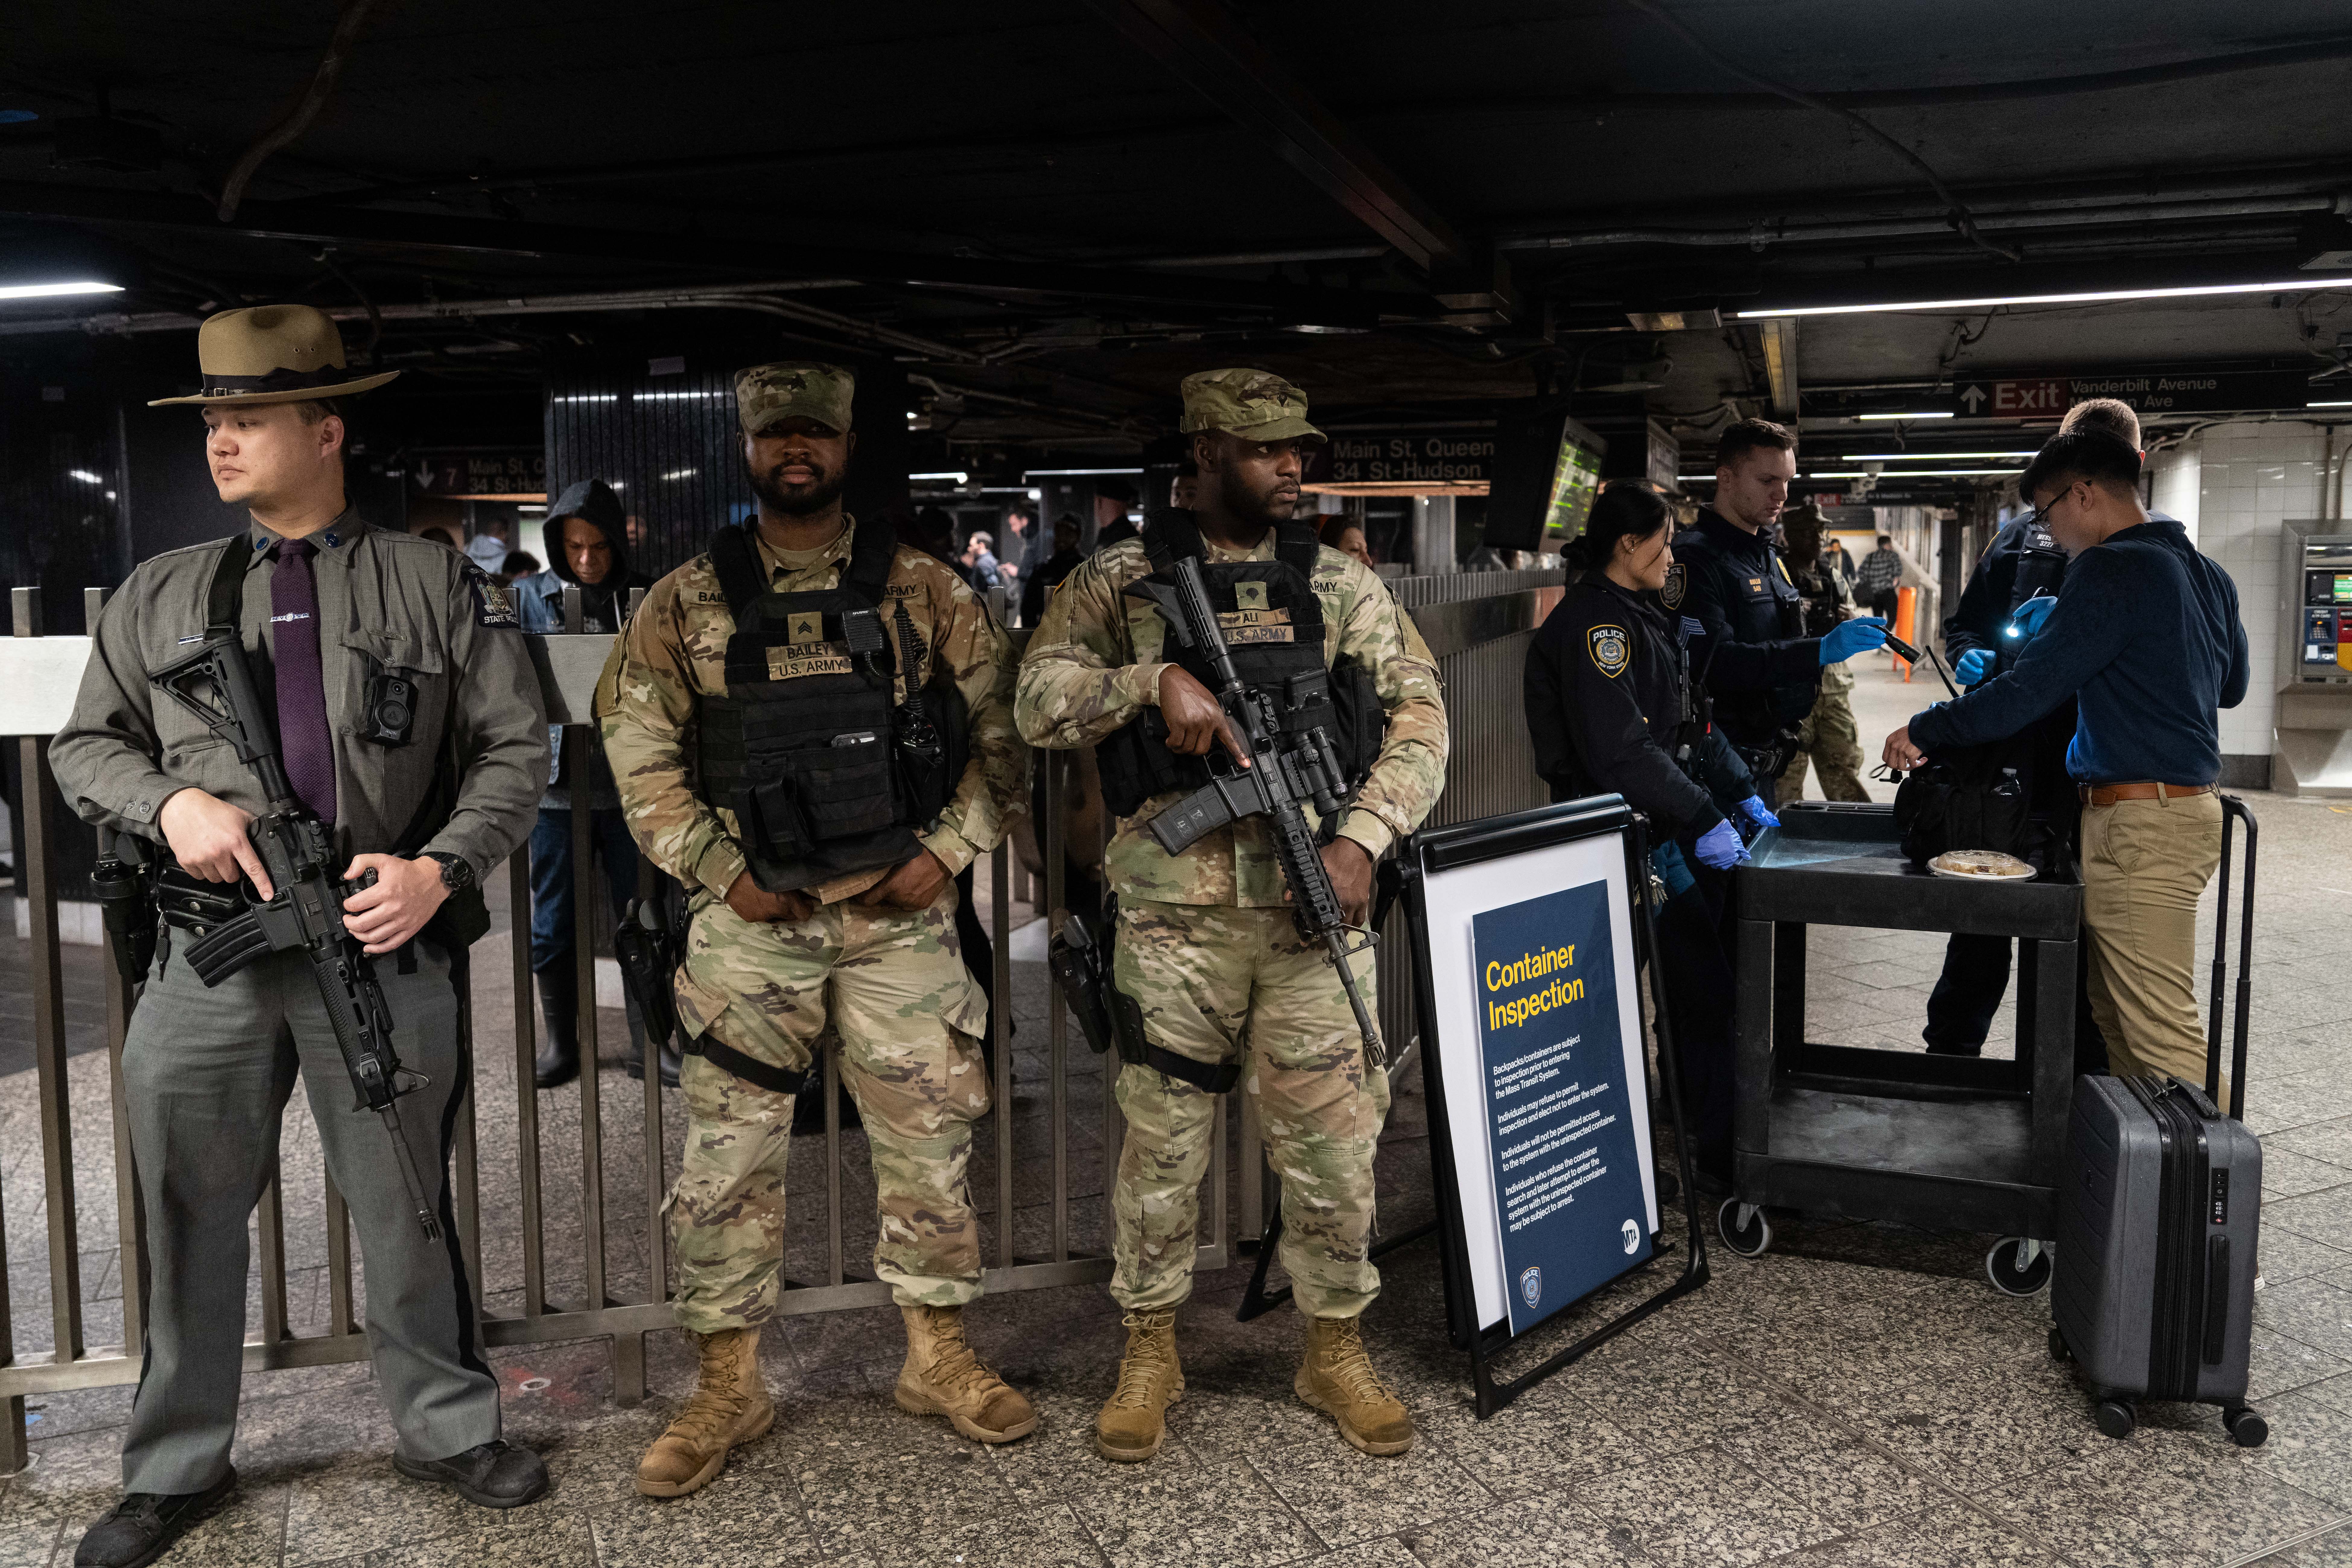 New York State police, MTAPD and the New York National Guard patrol and conduct container inspections at Grand Central Station.